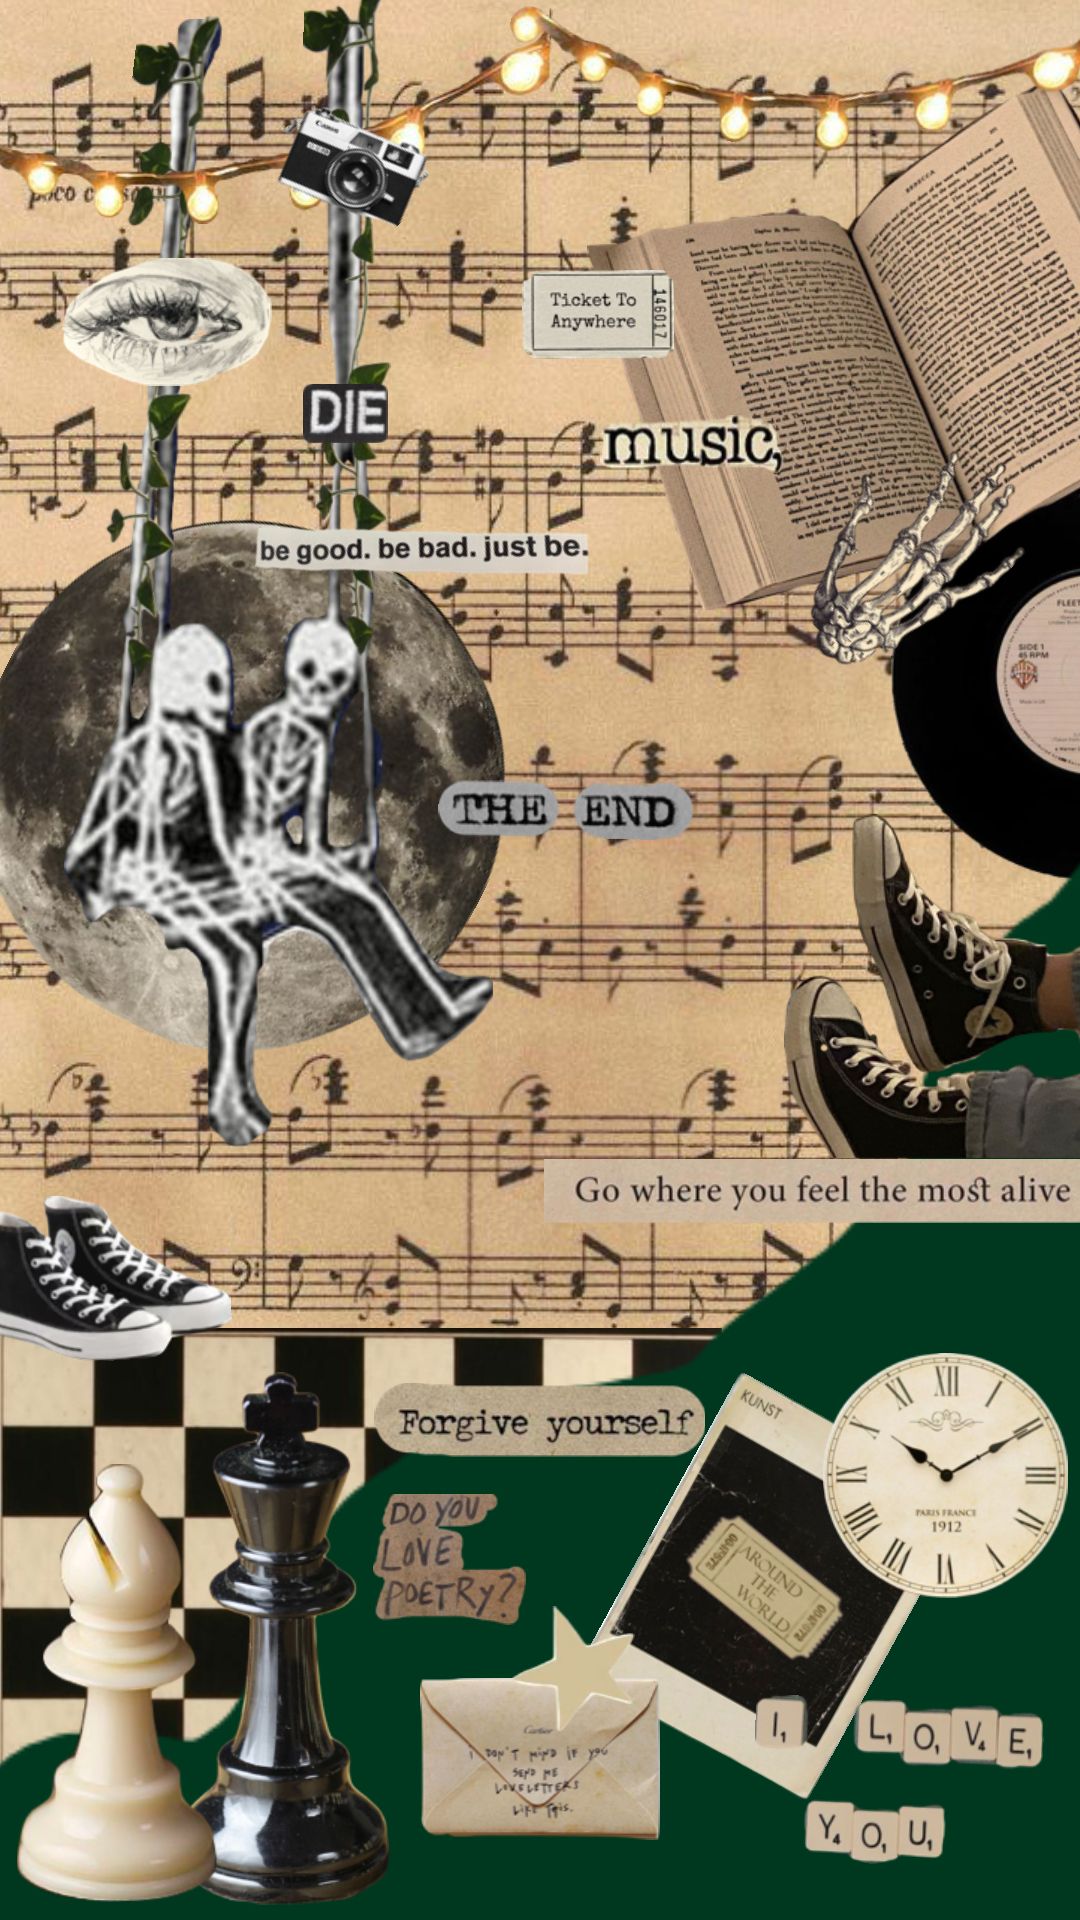 Aesthetic background with music notes, chess pieces, skeleton, clock, and book. - Chess, music, skeleton, books